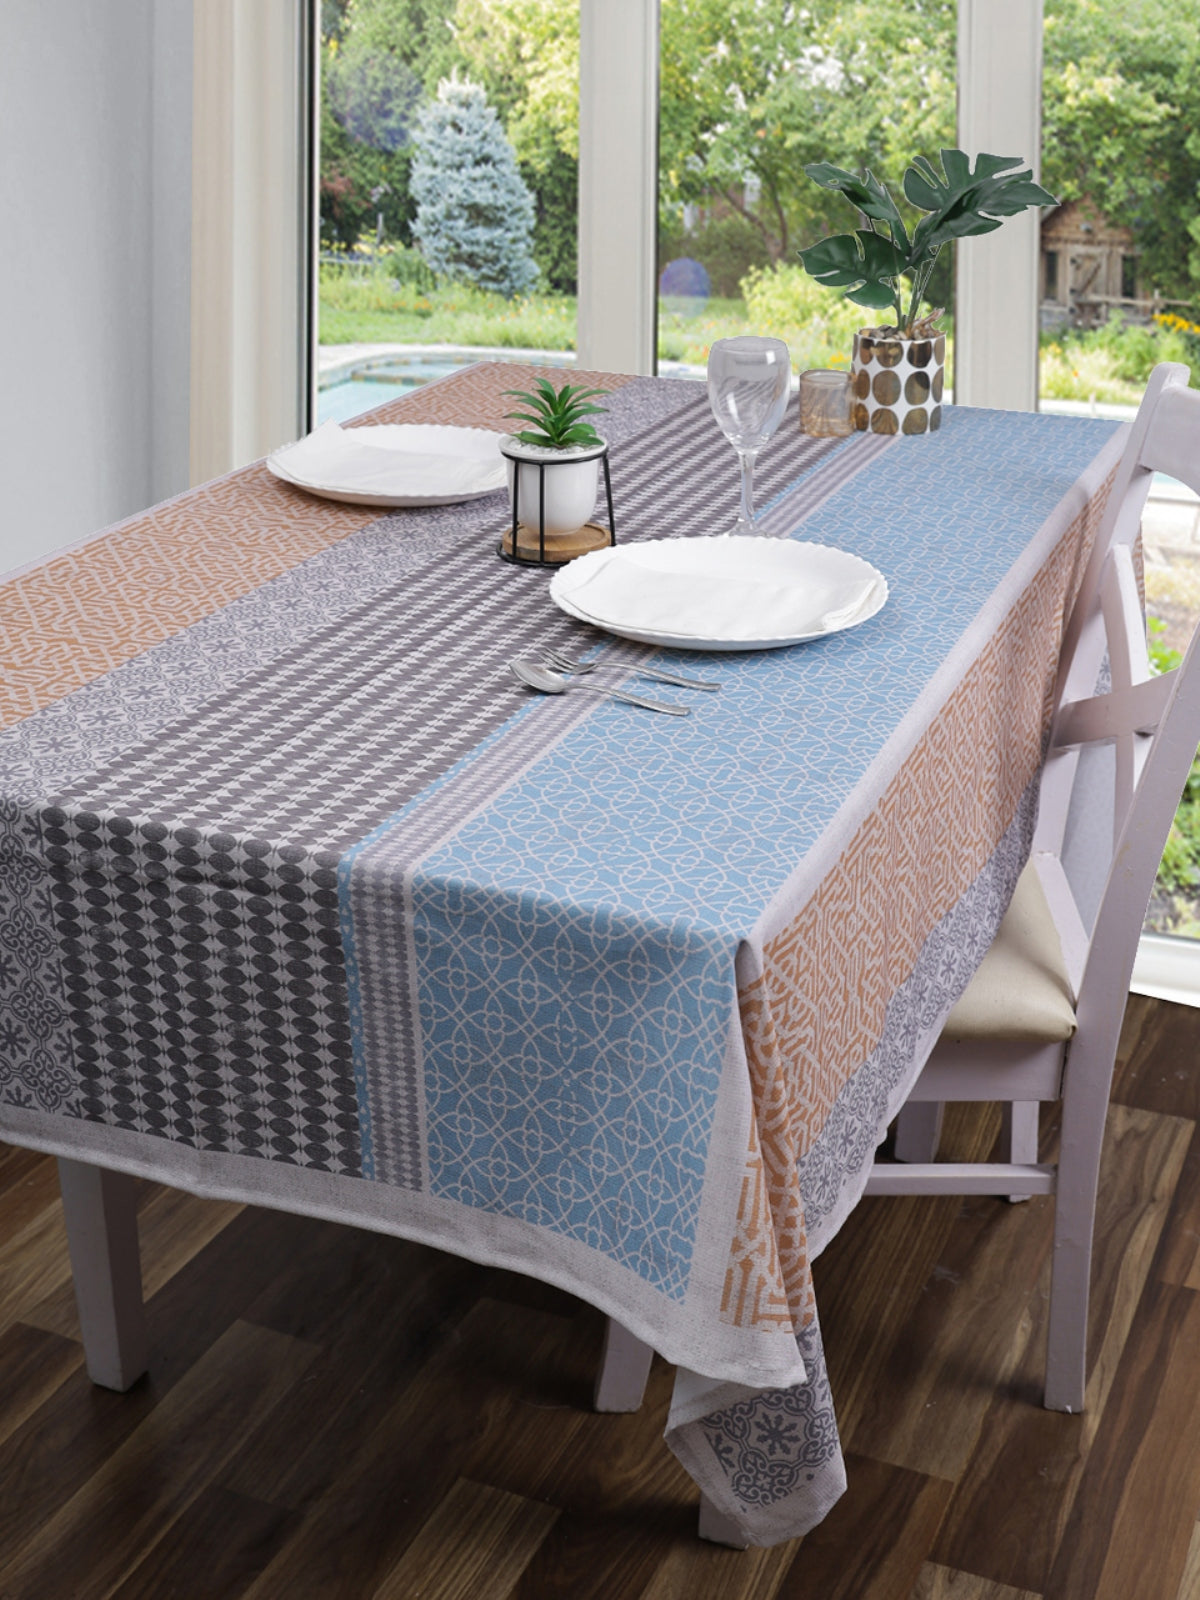 Polyester Geometric Printed Dining Table Cover Cloth 60x90 Inch - Multicolor